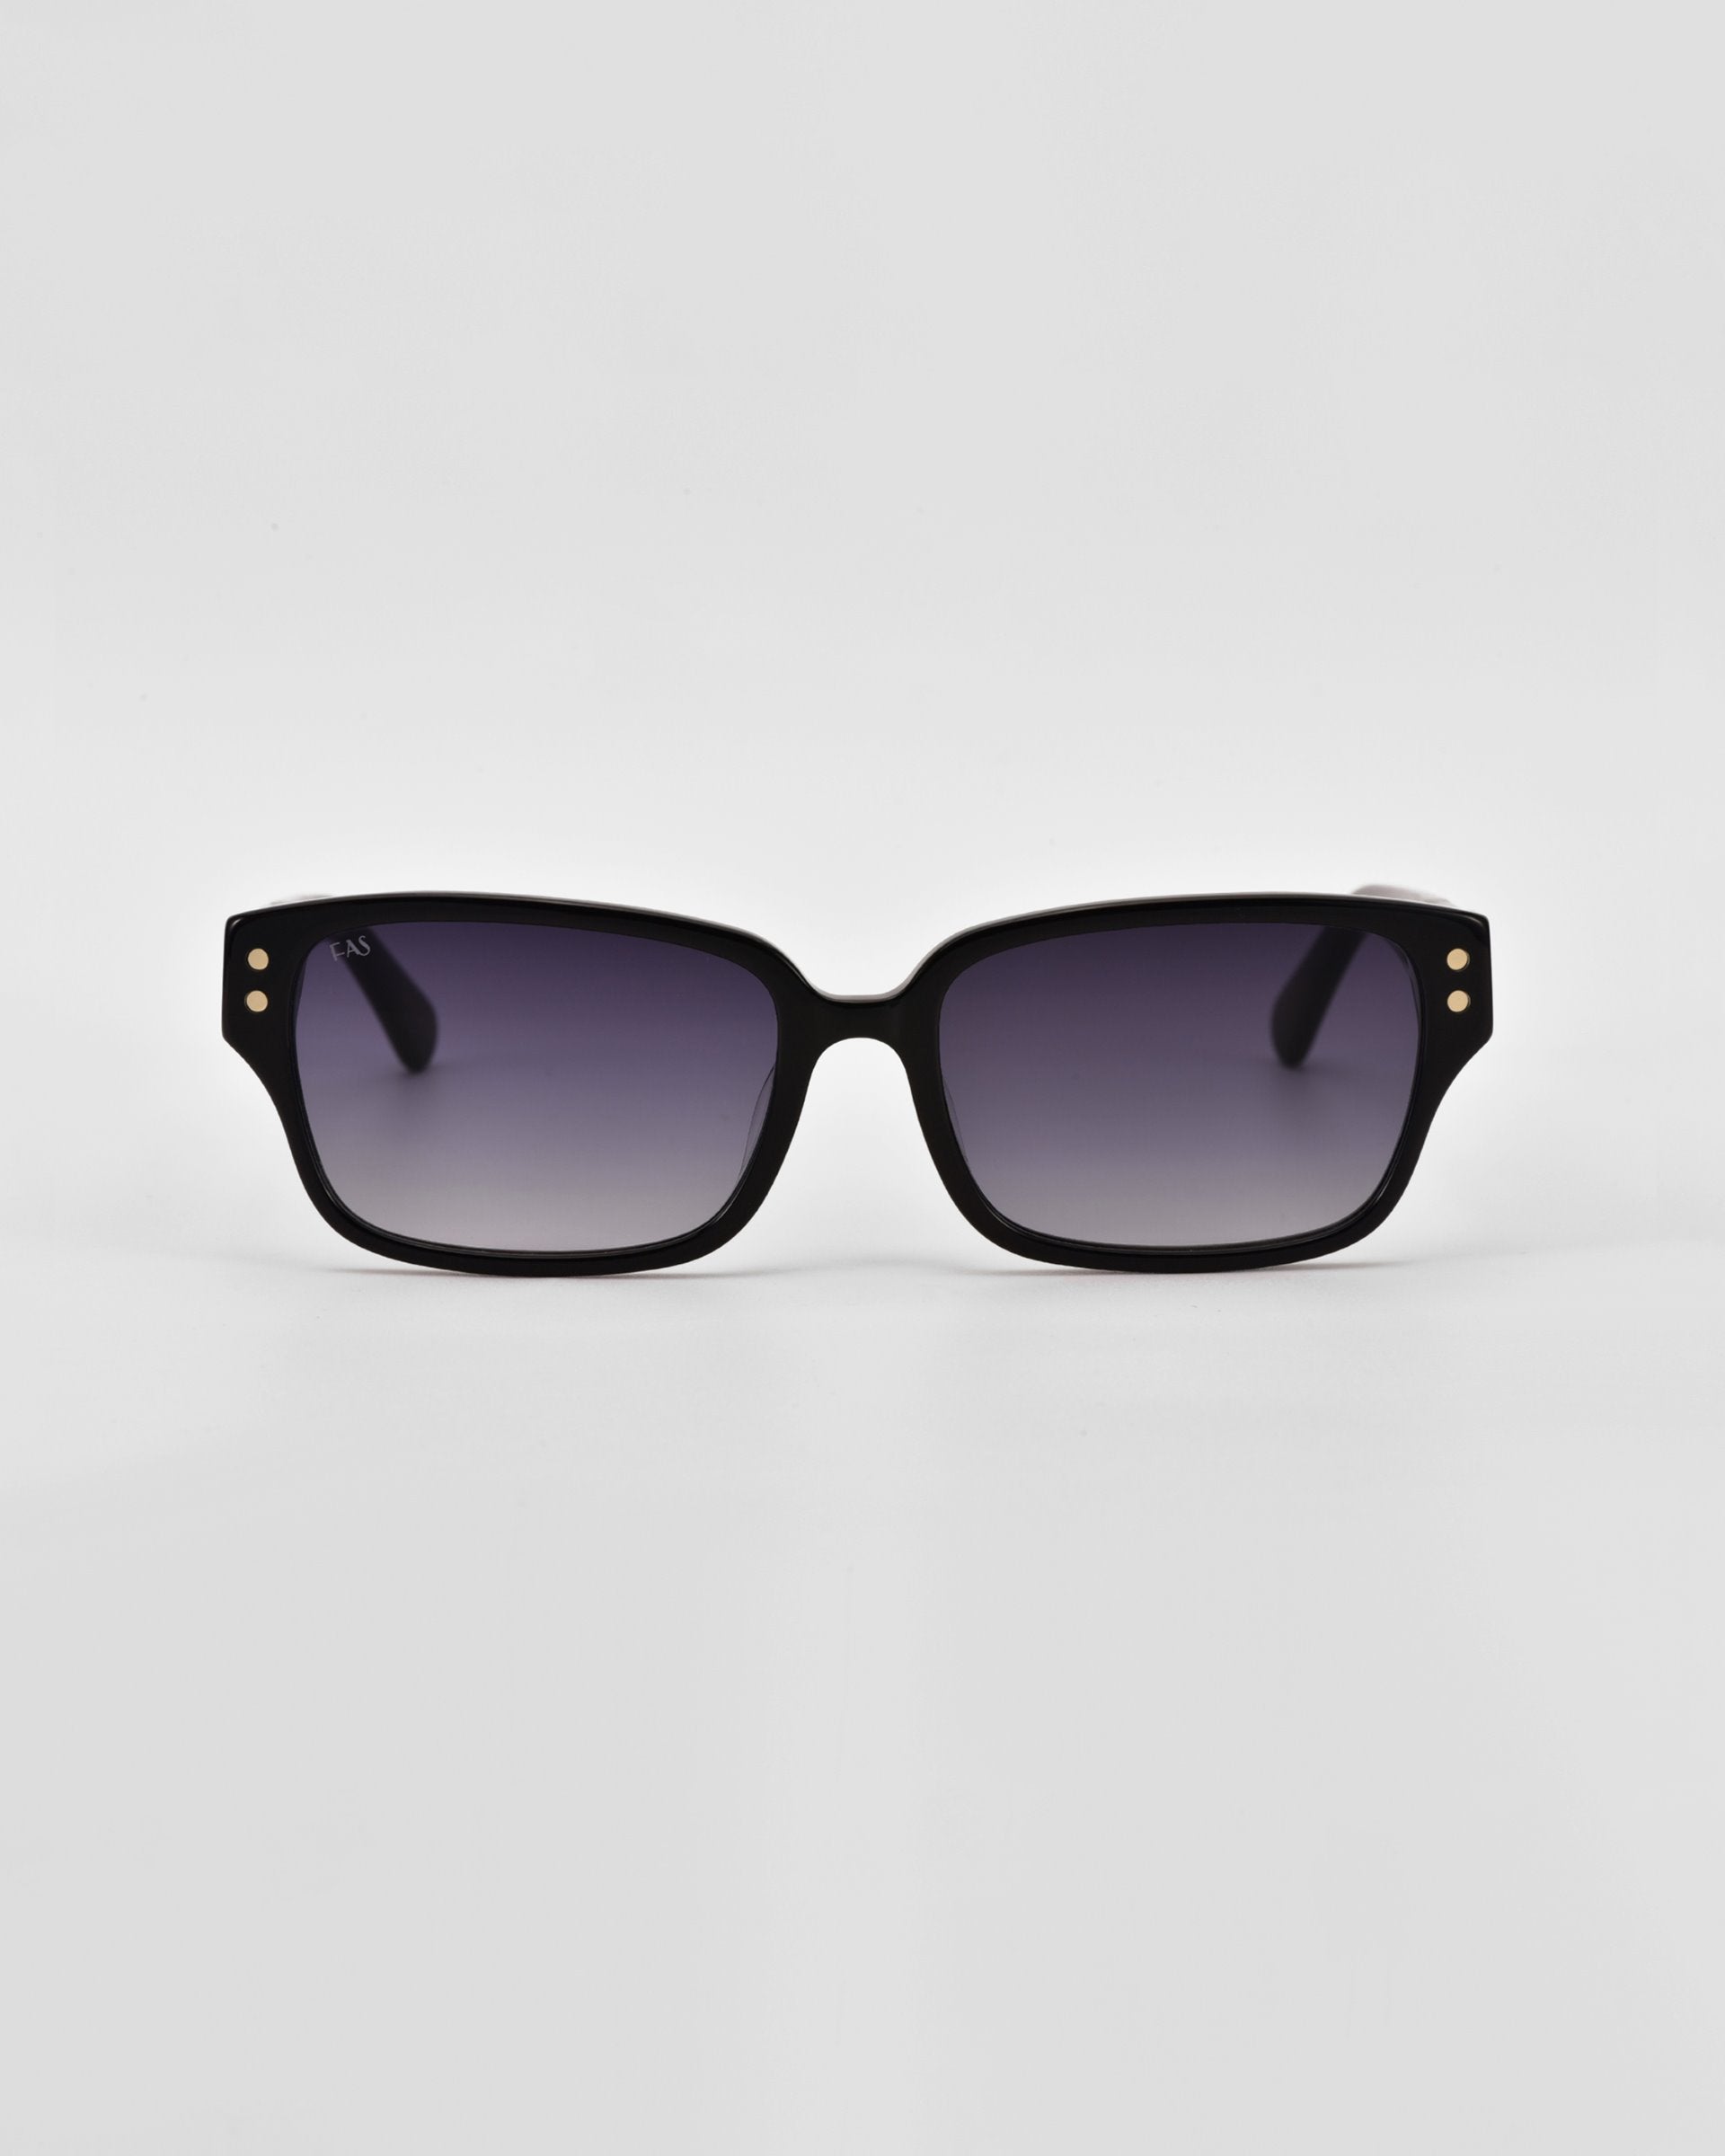 A pair of black rectangular Zenith sunglasses with gradient dark-to-light lenses. The handcrafted acetate frames feature two small gold-colored dots at the top corners of each lens. The background is plain white.

Product Name: Zenith
Brand Name: For Art's Sake®

Updated Sentence:
A pair of black rectangular For Art's Sake® Zenith sunglasses with gradient dark-to-light lenses. The handcrafted acetate frames feature two small gold-colored dots at the top corners of each lens. The background is plain white.